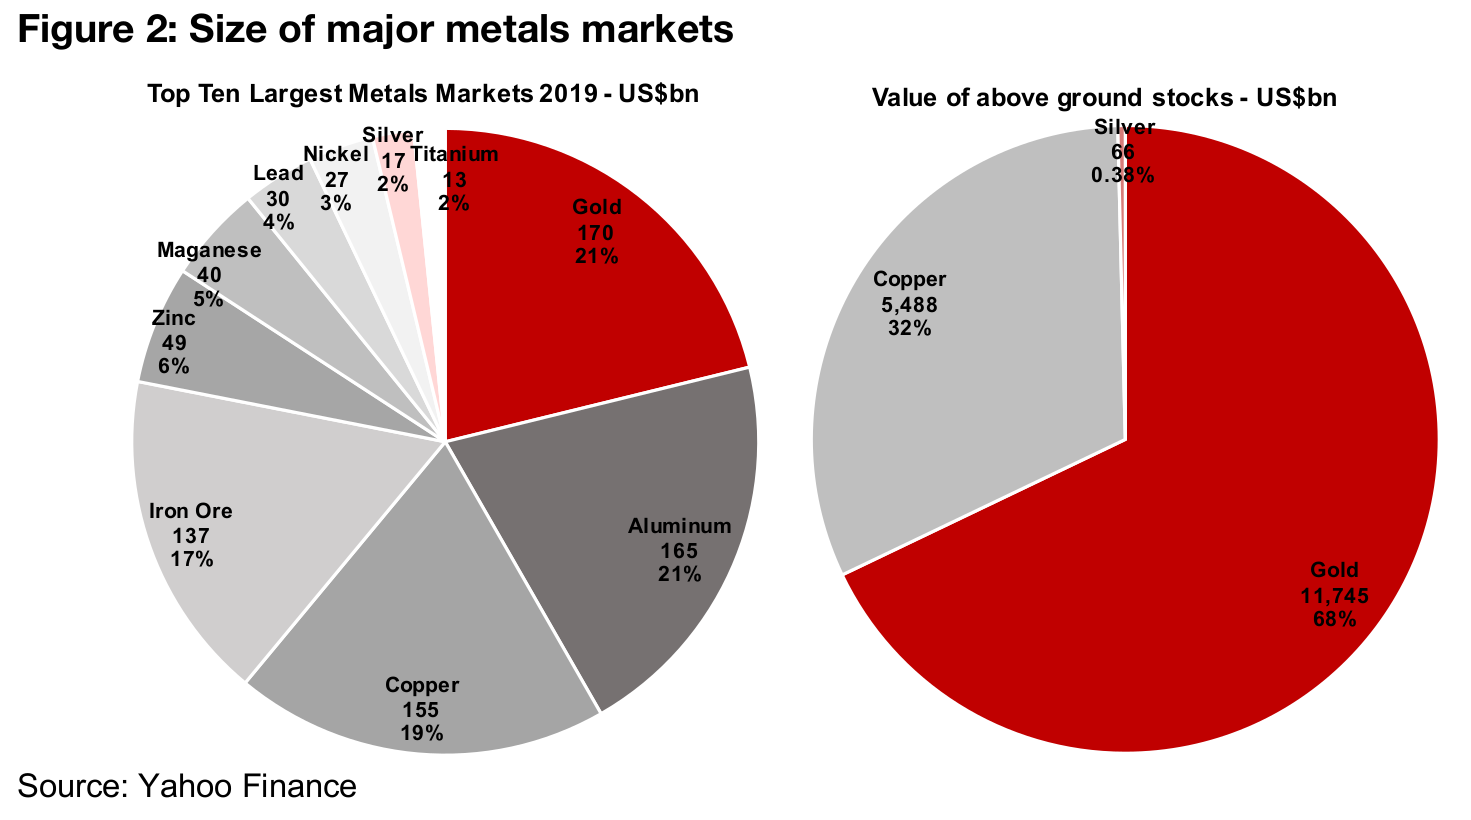 Silver is a very small market compared to gold